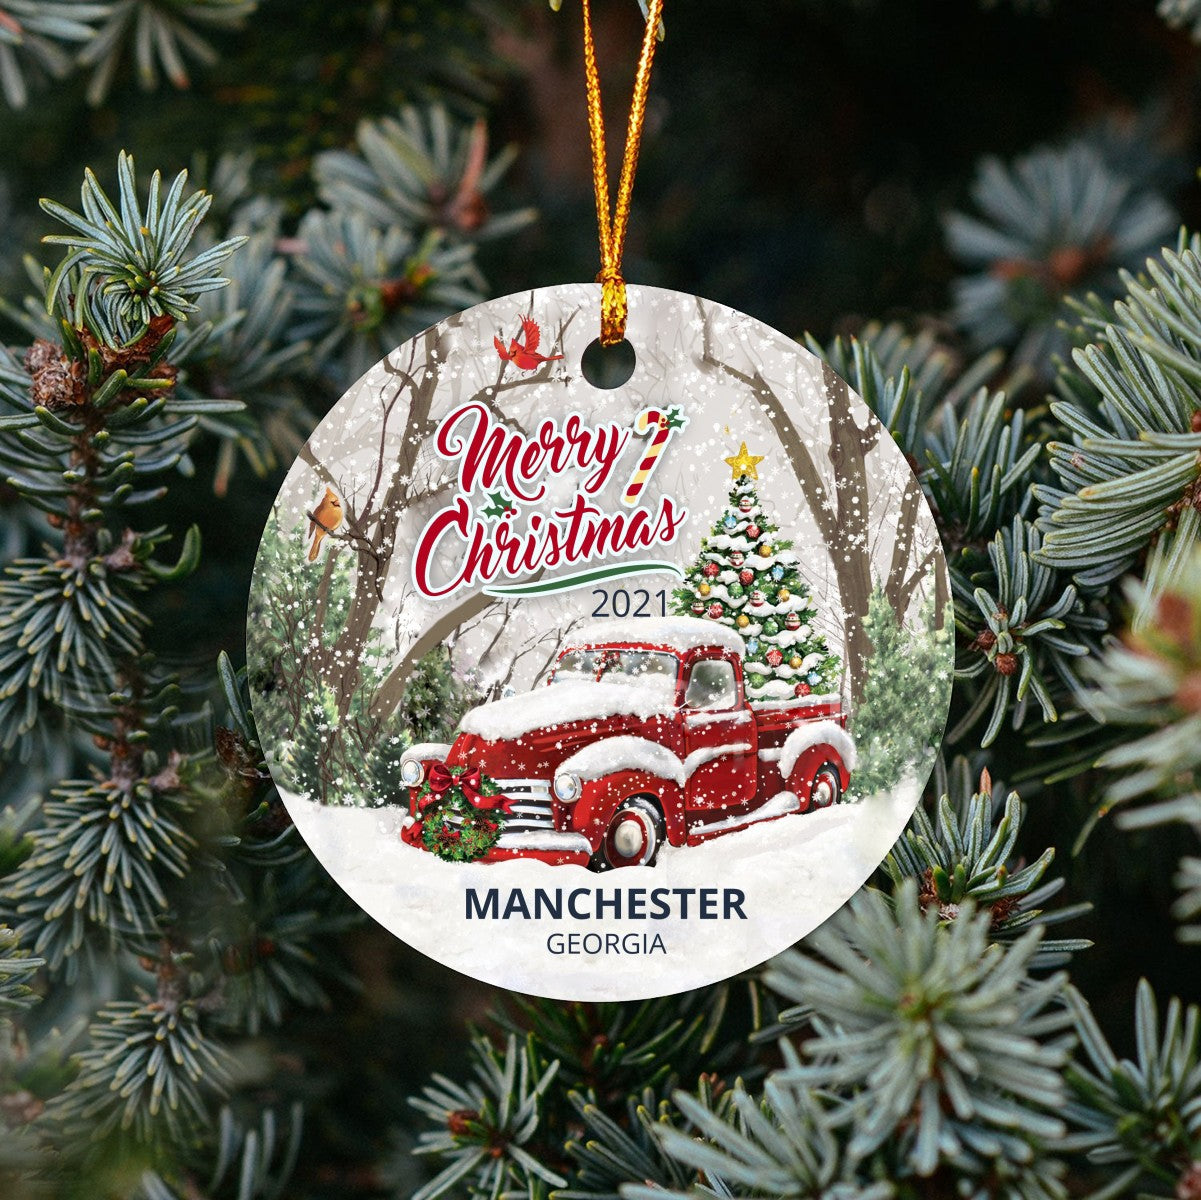 Christmas Tree Ornaments Manchester - Ornament With Name City, State Manchester Georgia GA Ornament - Red Truck Xmas Ornaments 3'' Plastic Gift For Family, Friend And Housewarming